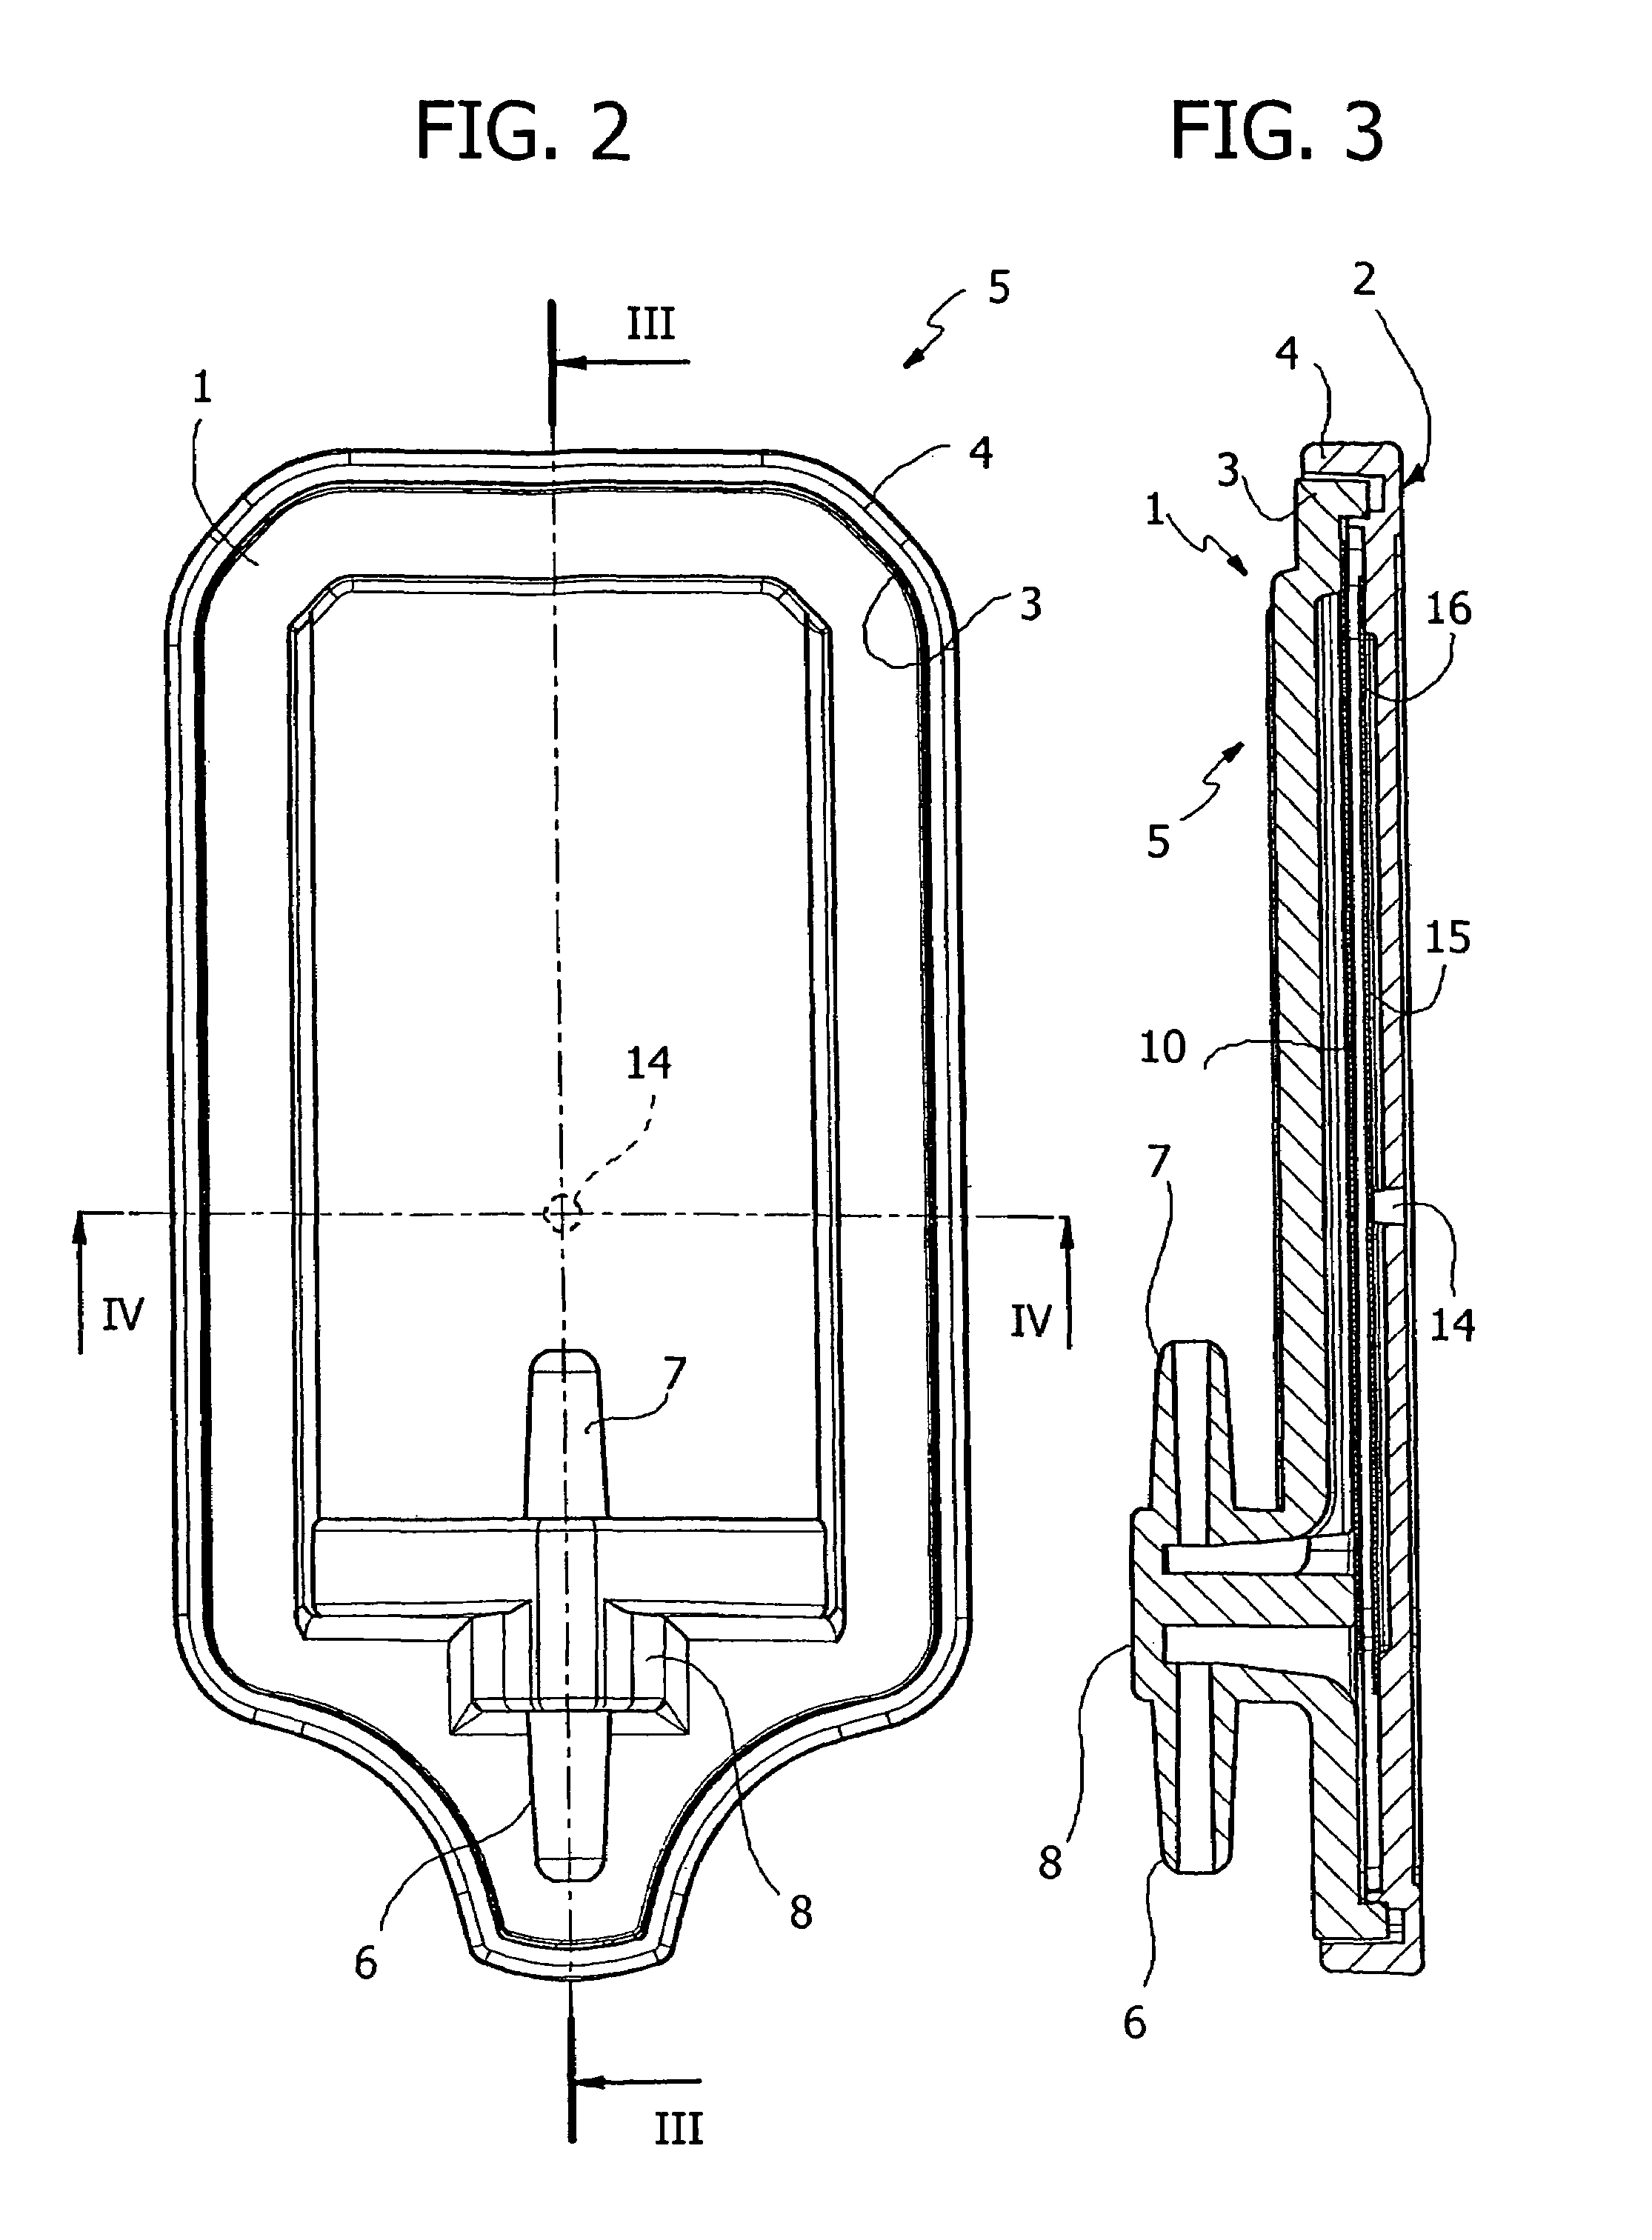 Flat filter for venting gas in intravenous medical lines